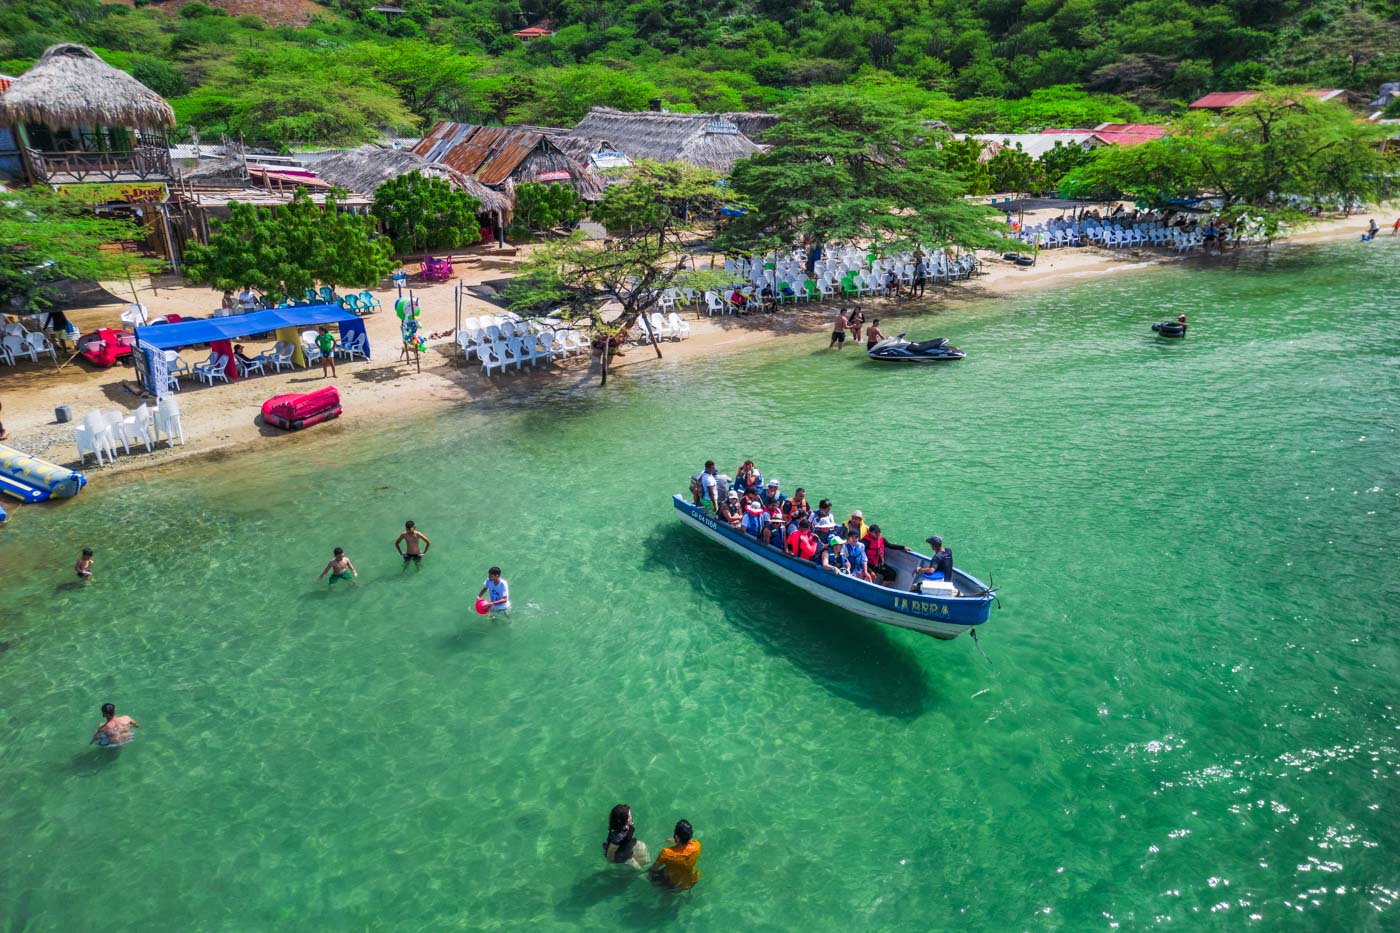 A taxi boat leaving Playa Grande while people are swimming in the blue water of the Caribbean.